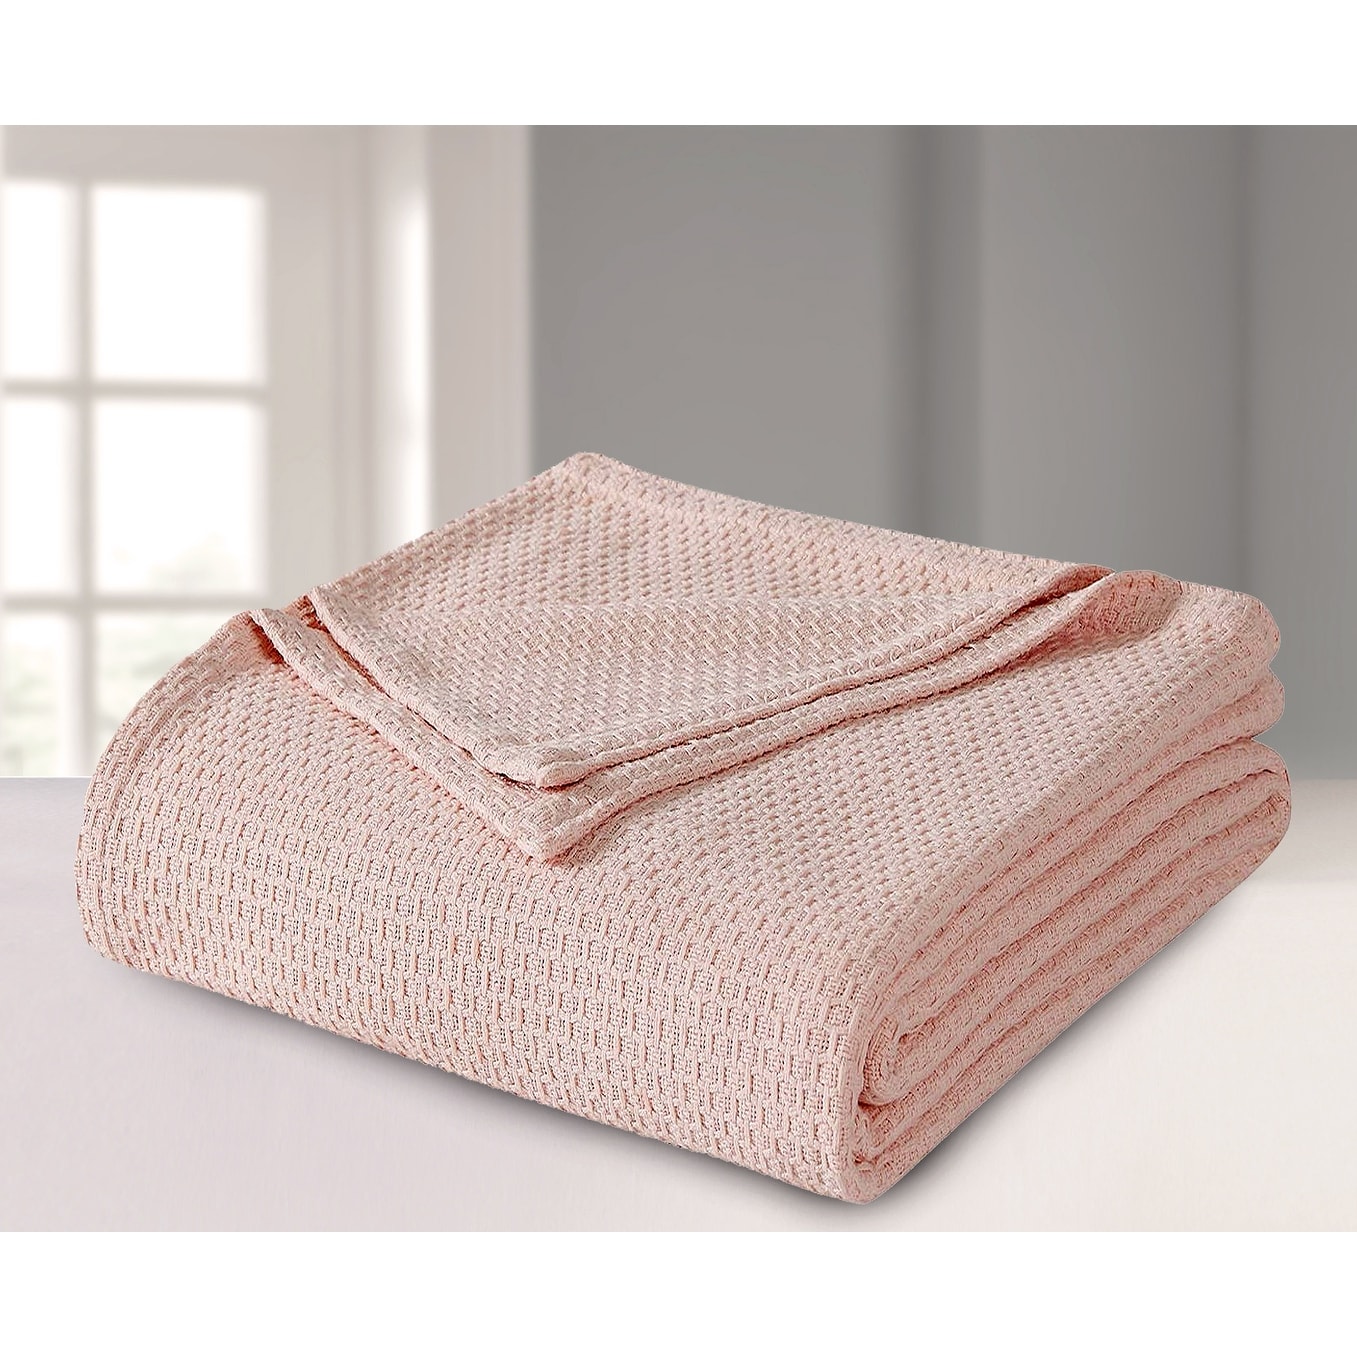 100 Percent Cotton Thermal Blanket